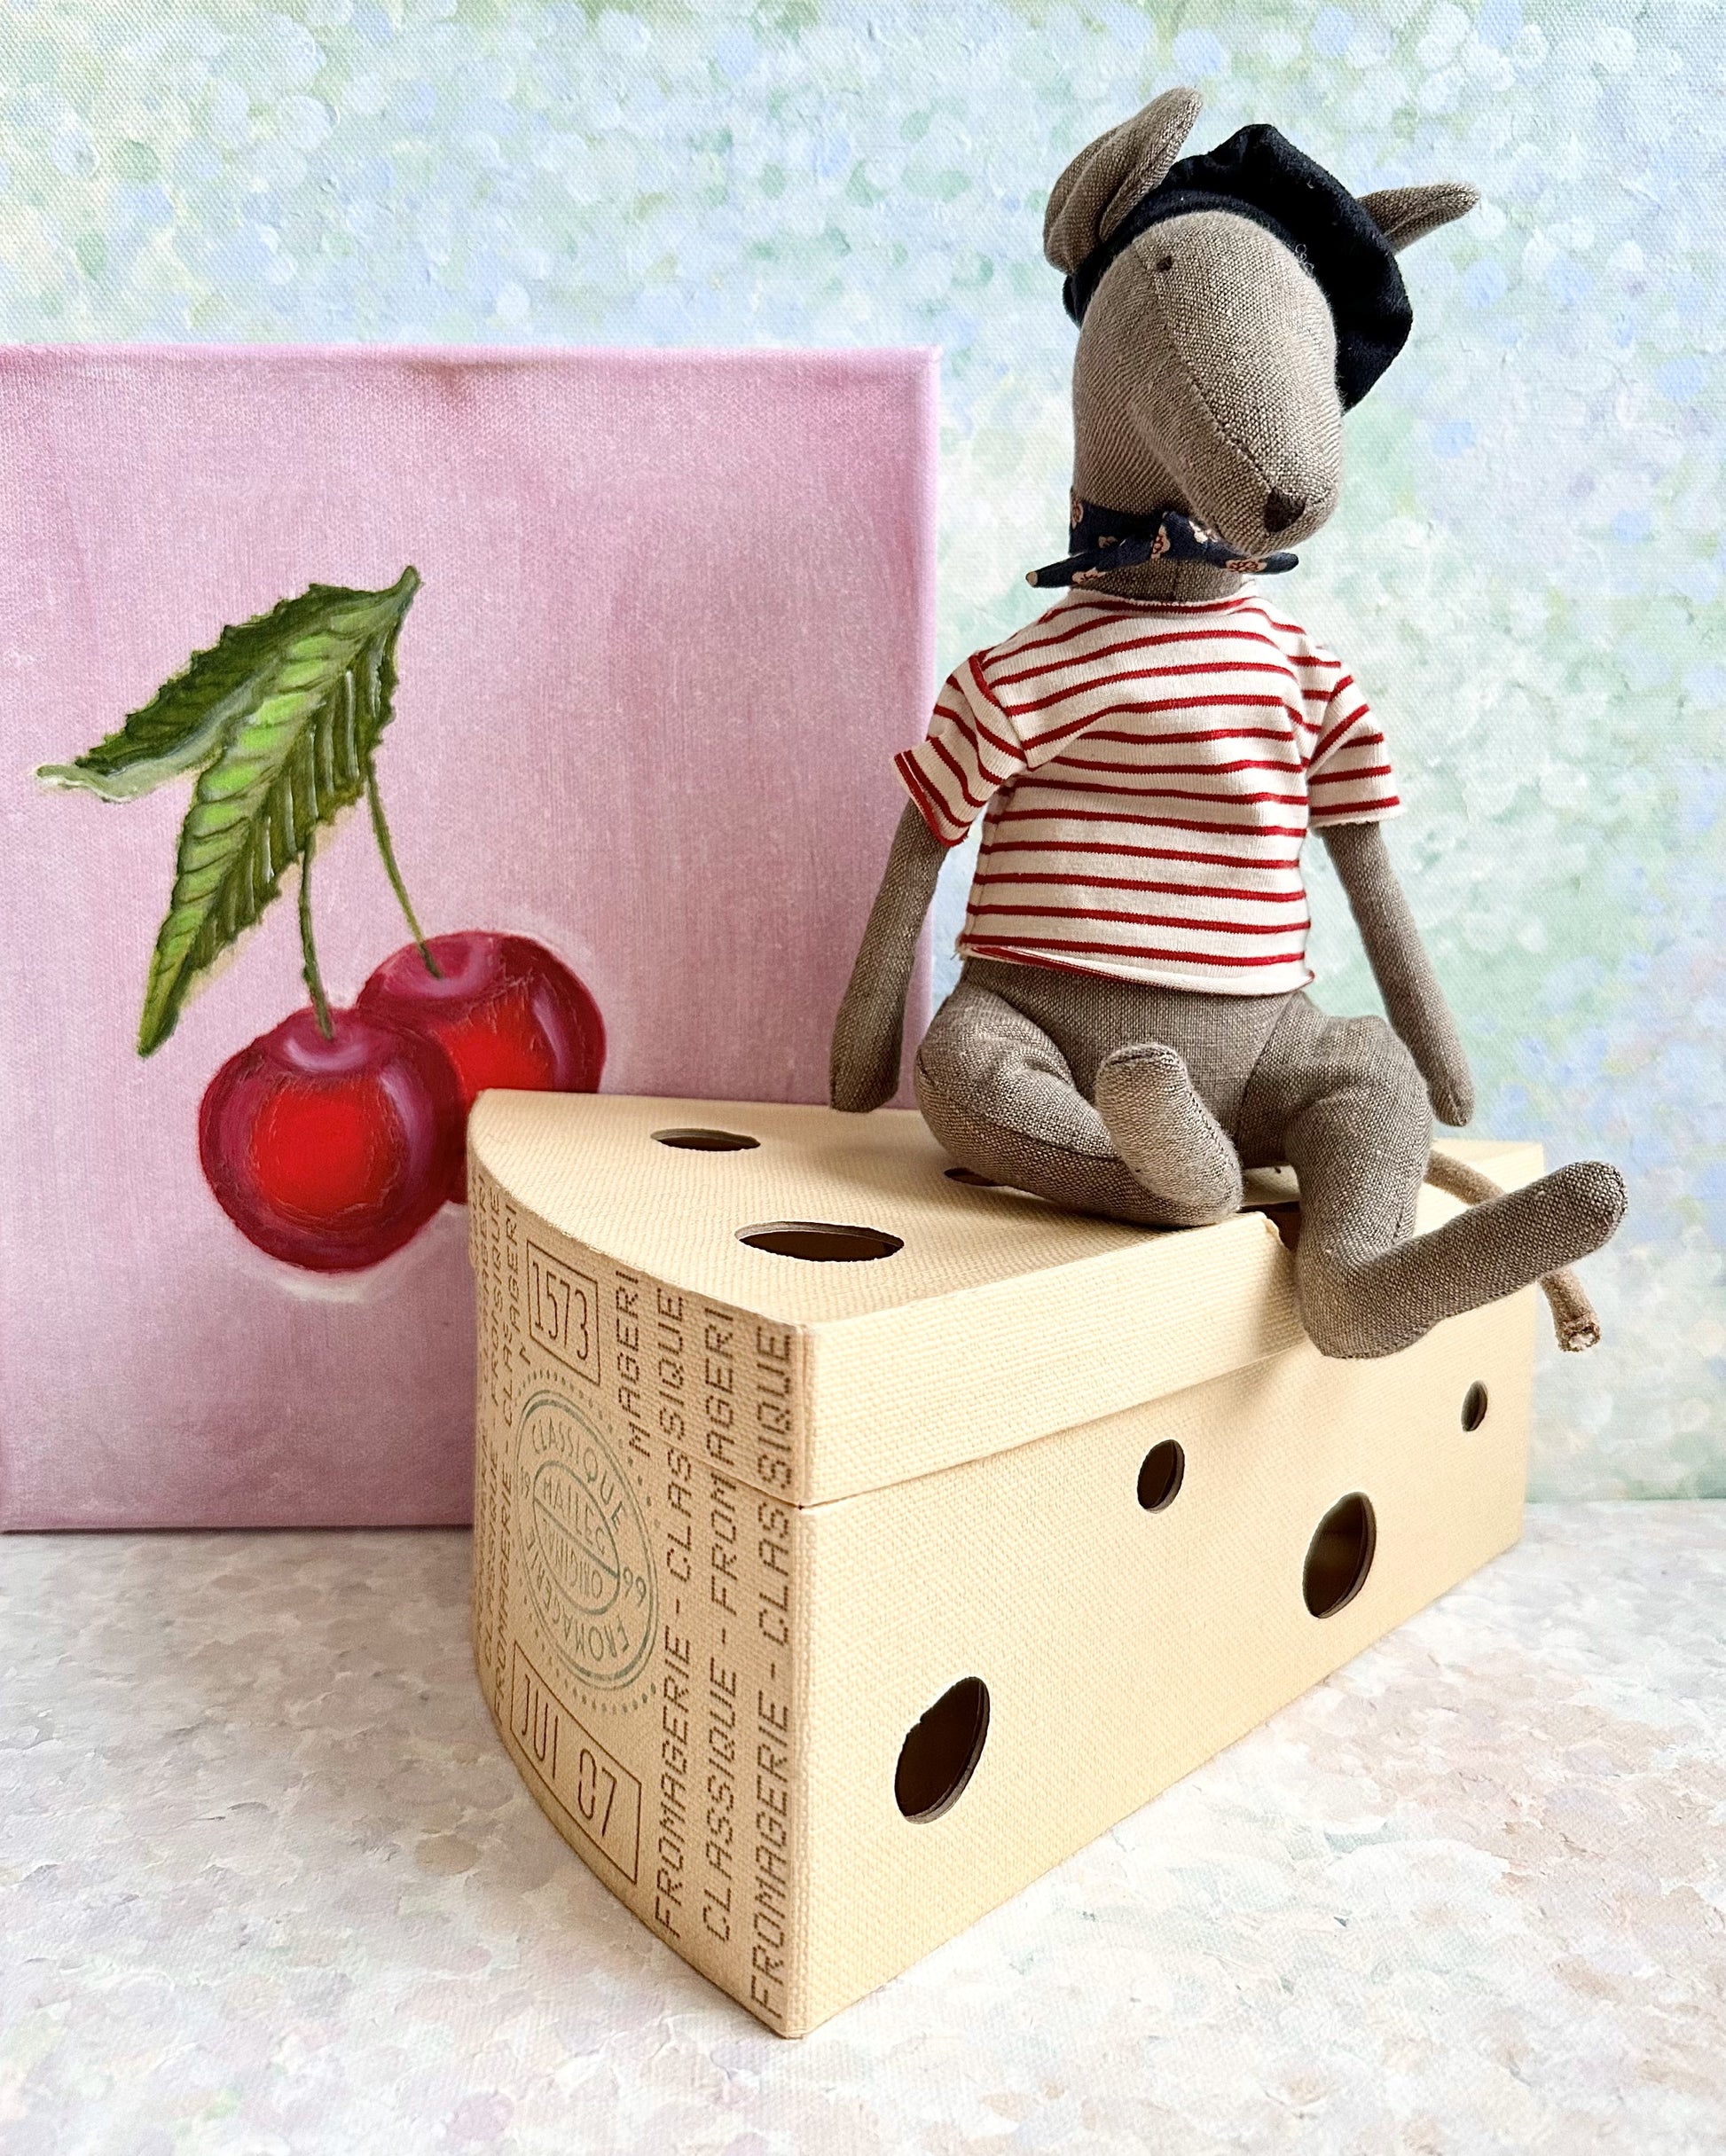 Rat in Cheese Box - 2019